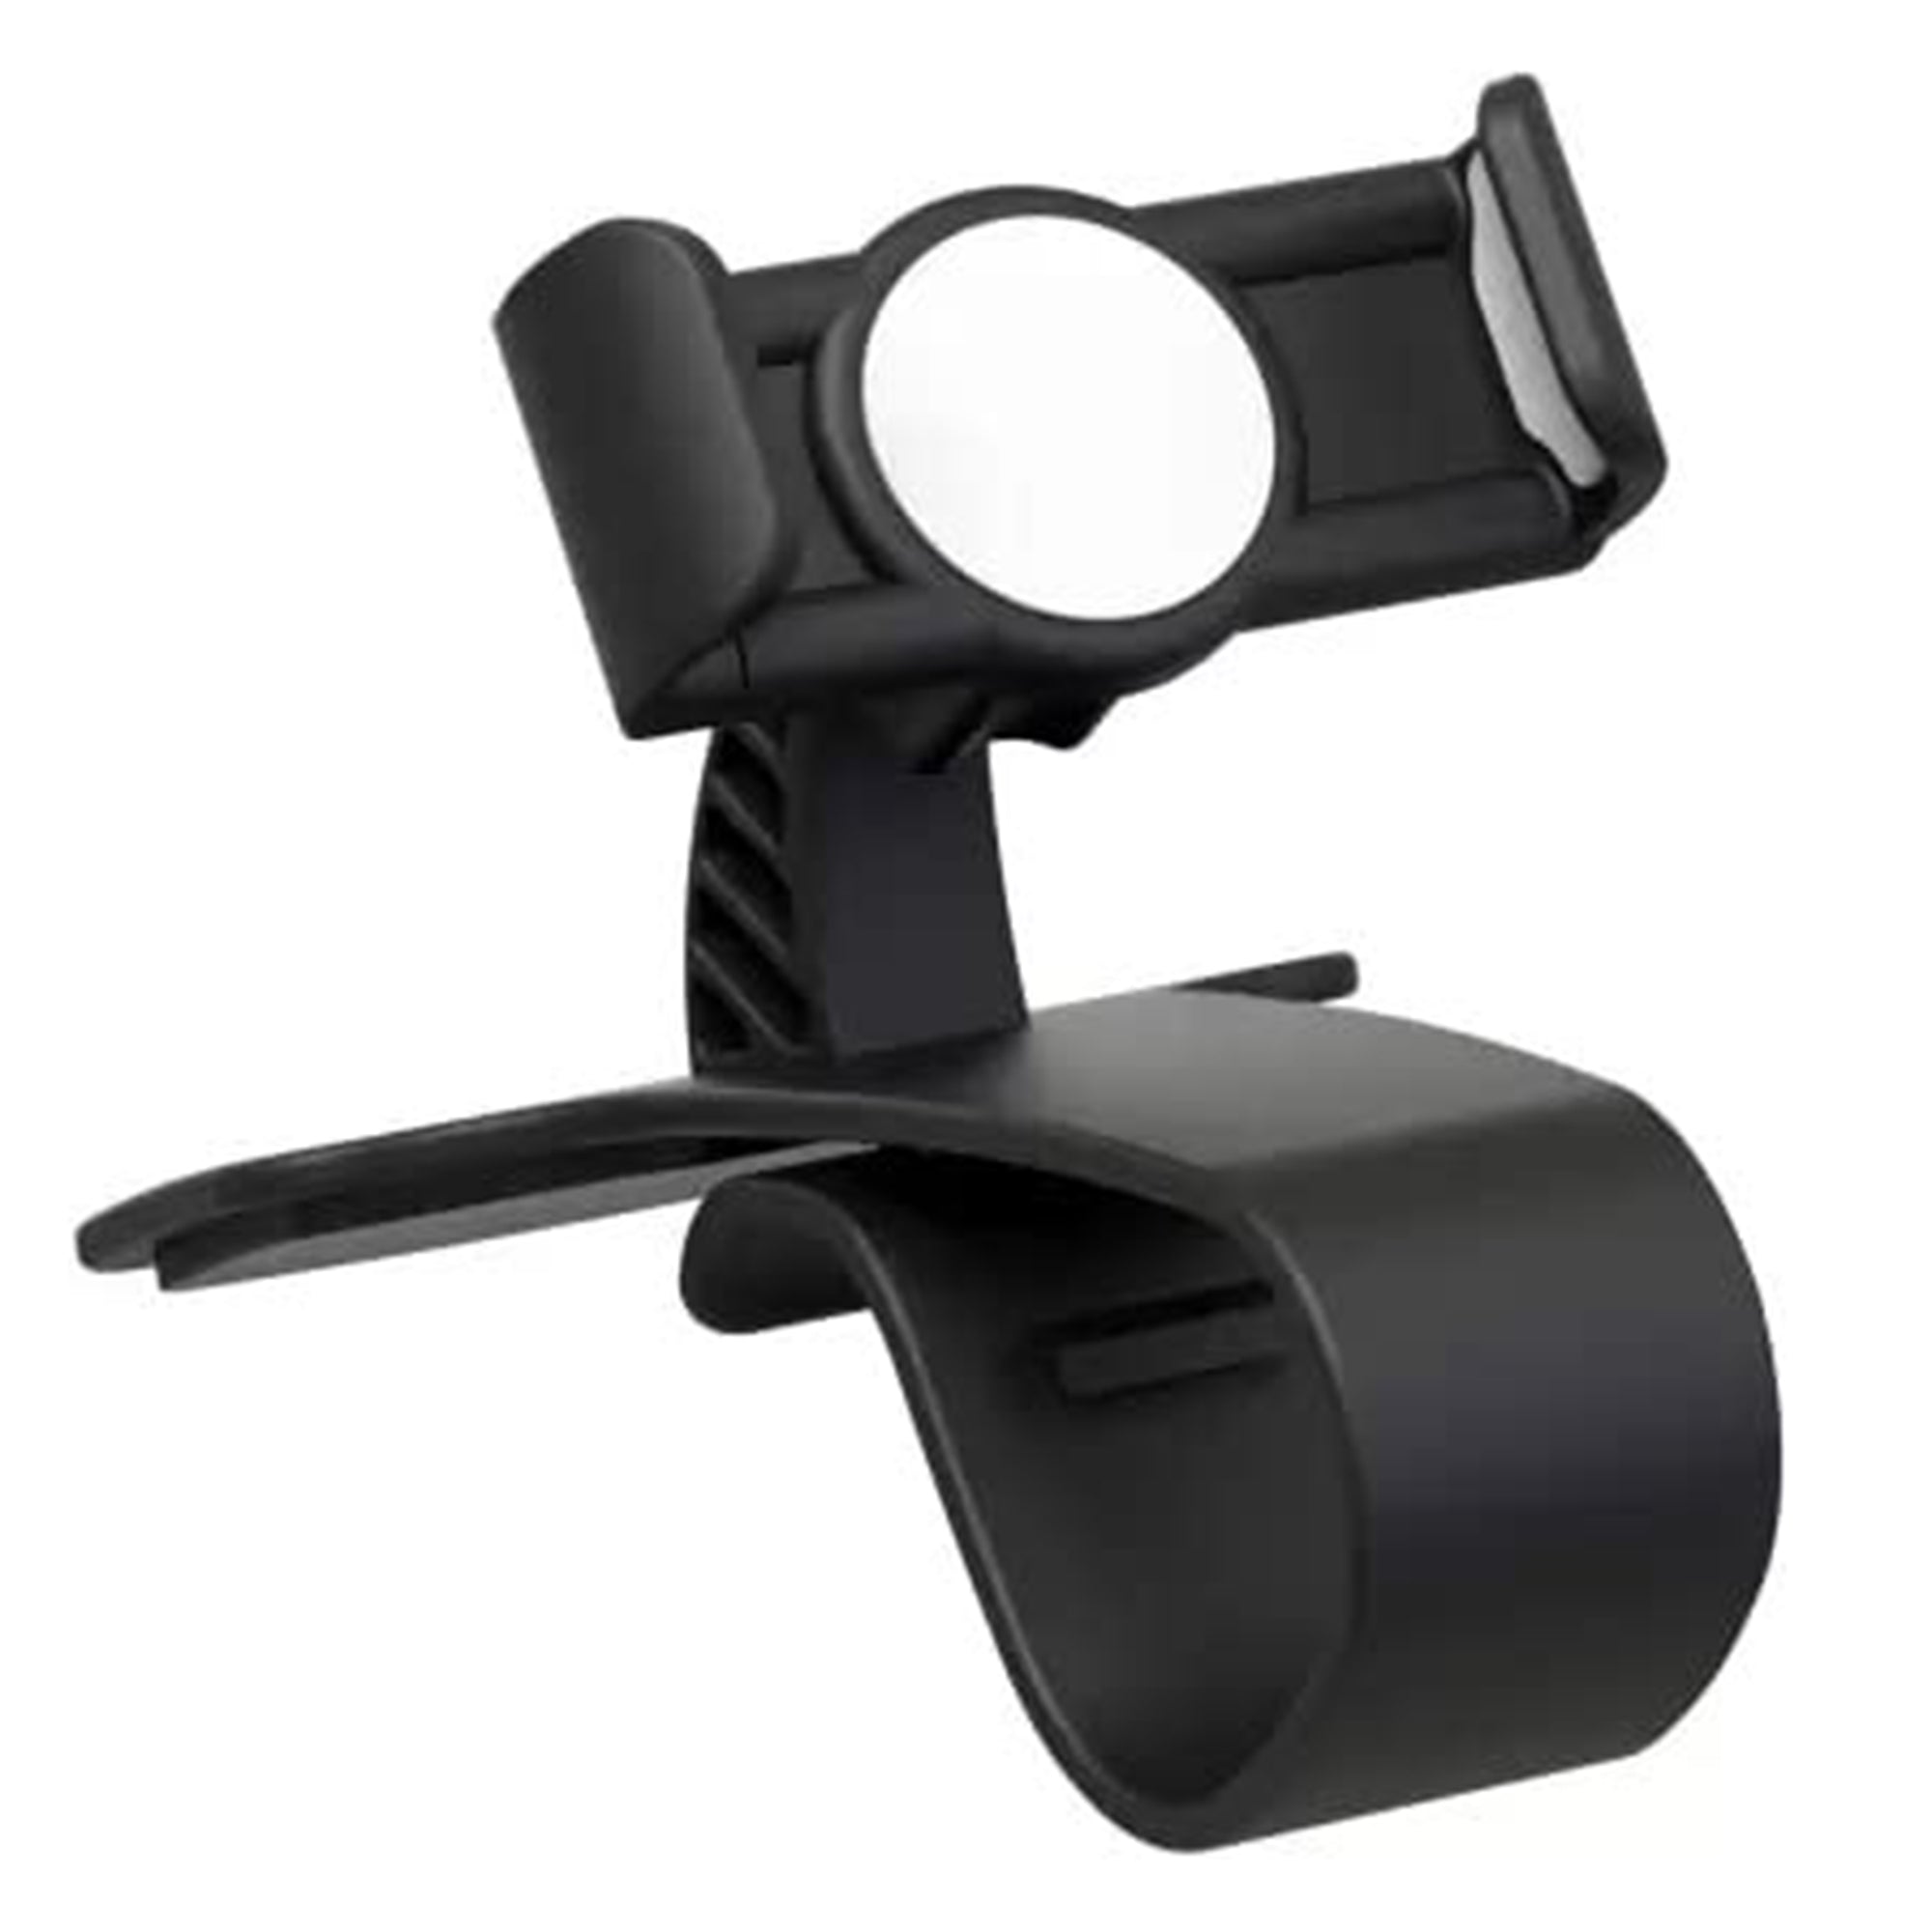 Manogyam Car Mobile Holder: Enhance Your Driving Experience